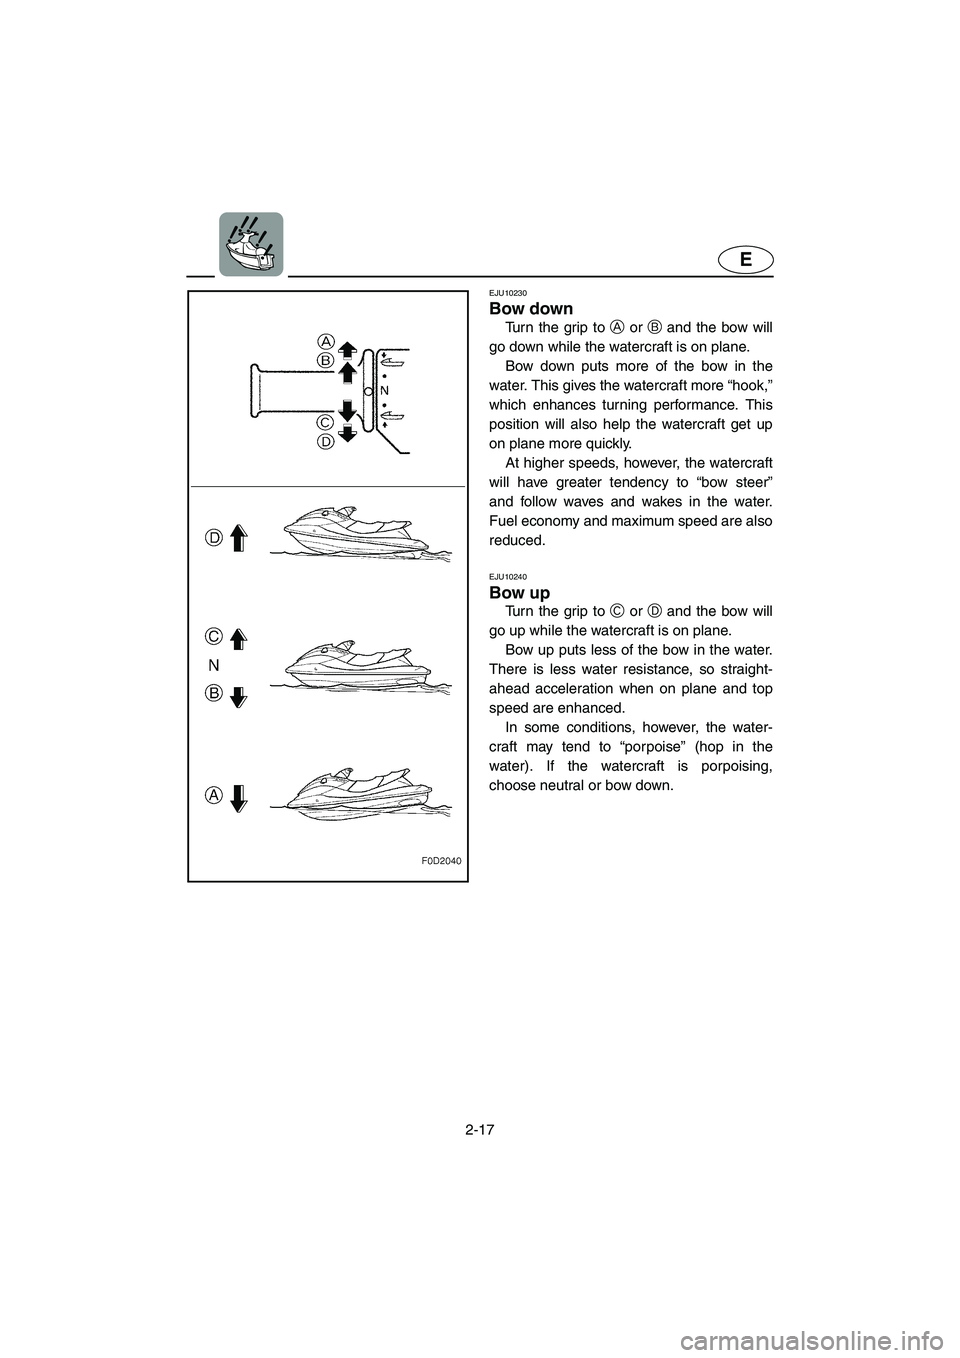 YAMAHA FX HO 2006  Owners Manual 2-17
E
EJU10230 
Bow down  
Turn the grip to A or B and the bow will
go down while the watercraft is on plane. 
Bow down puts more of the bow in the
water. This gives the watercraft more “hook,”
w